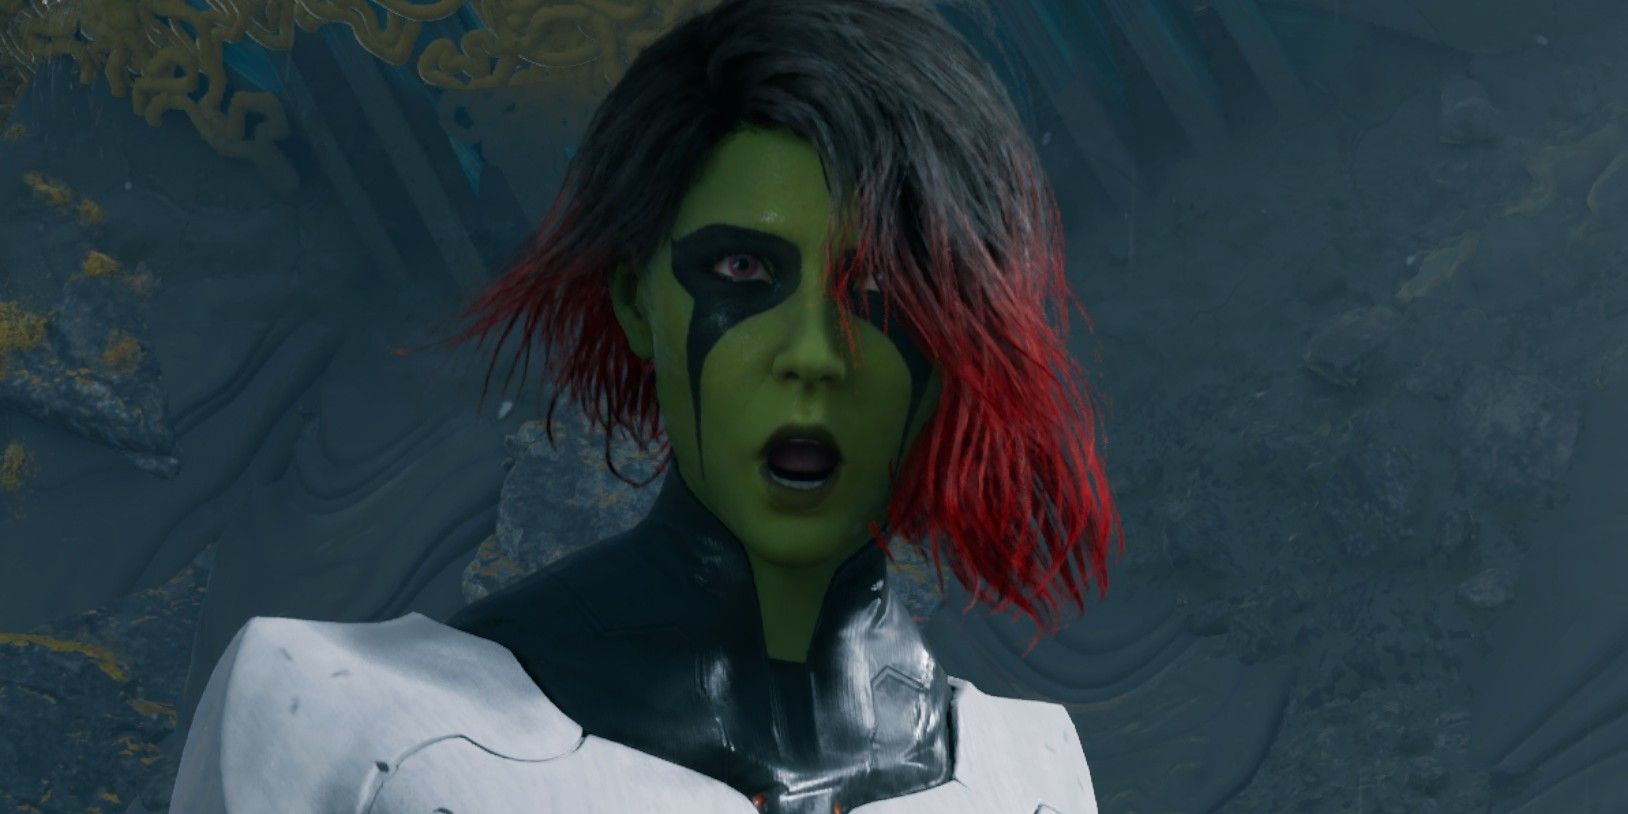 Guardians of the Galaxy Vol. 4: How is Gamora alive? Analyzing the theories